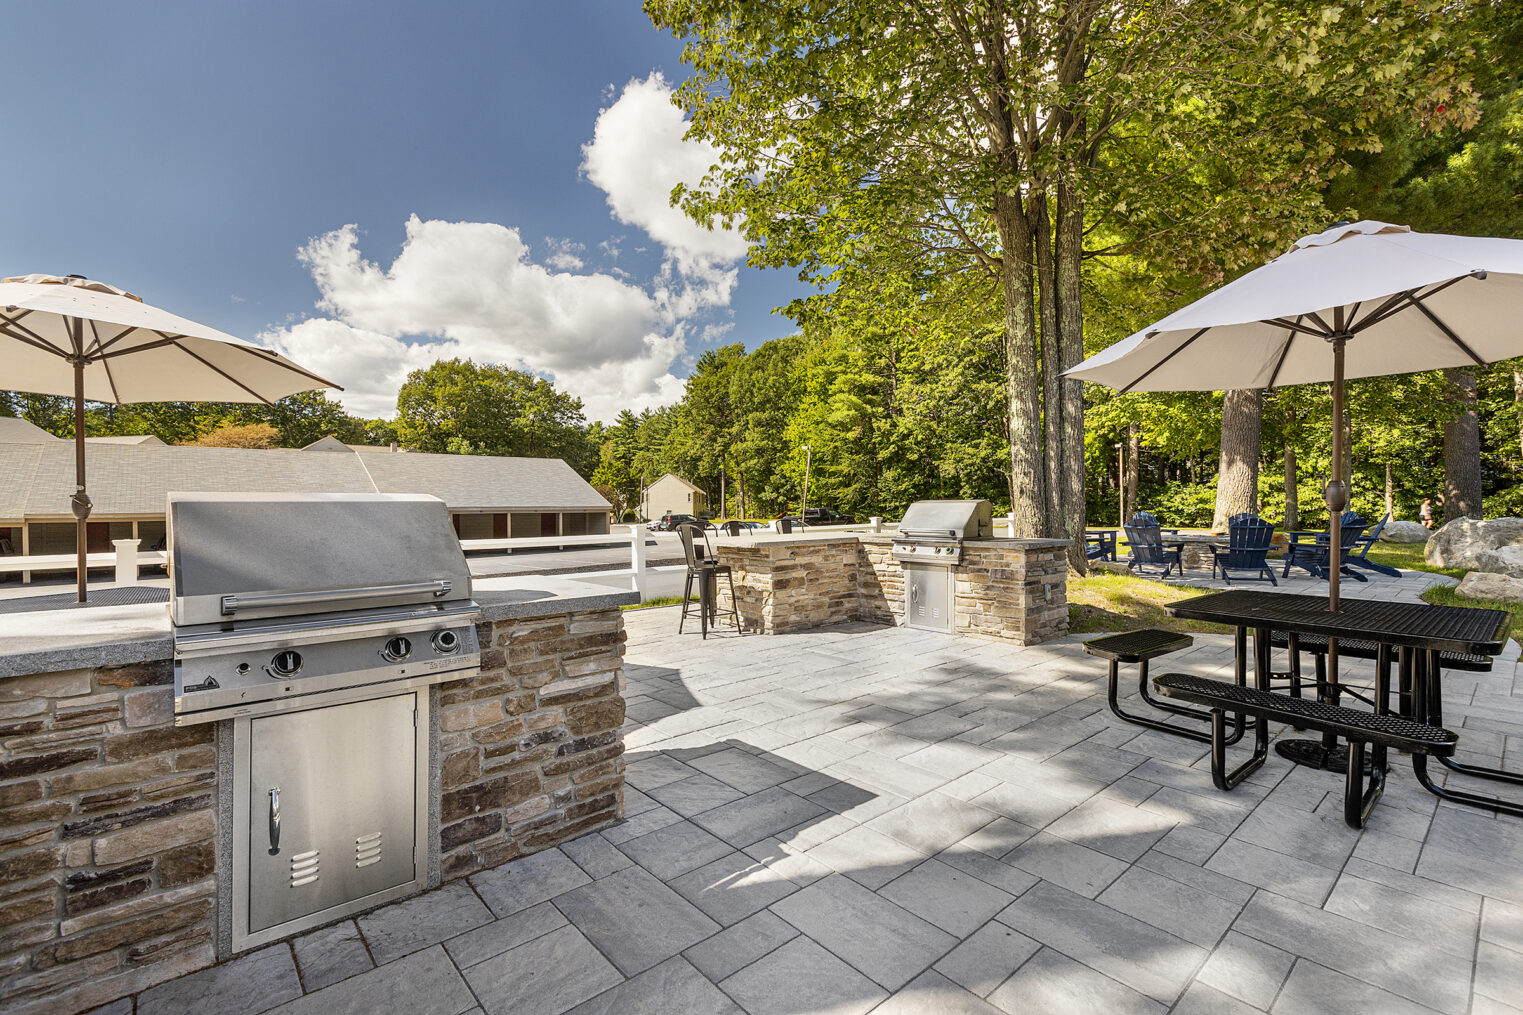 Recreation patio with outdoor kitchens. Commercial Landscape Design & Build Project at Cranmore Ridge in Concord, MA.